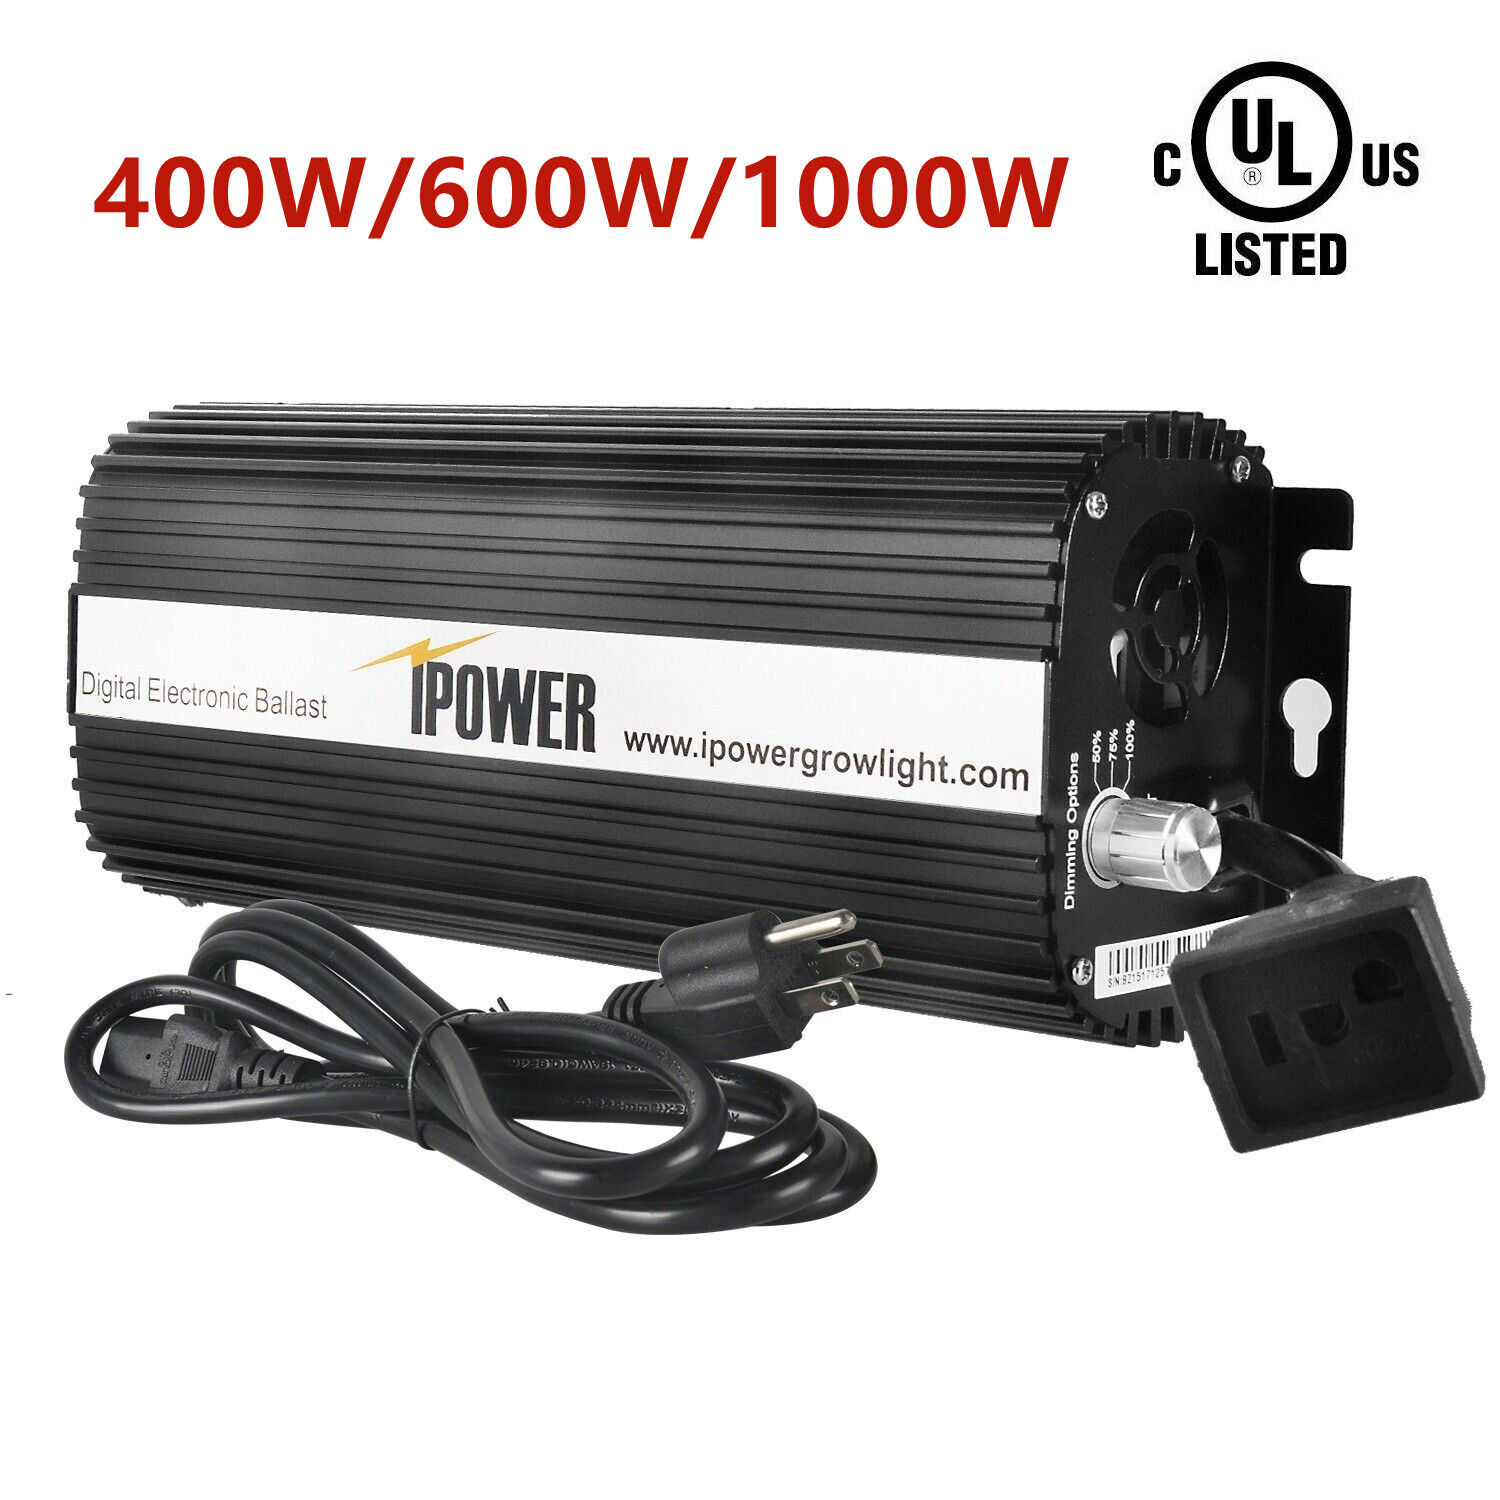 iPower Horticulture Dimmable Digital Ballast Electronic for Grow Light HPS MH